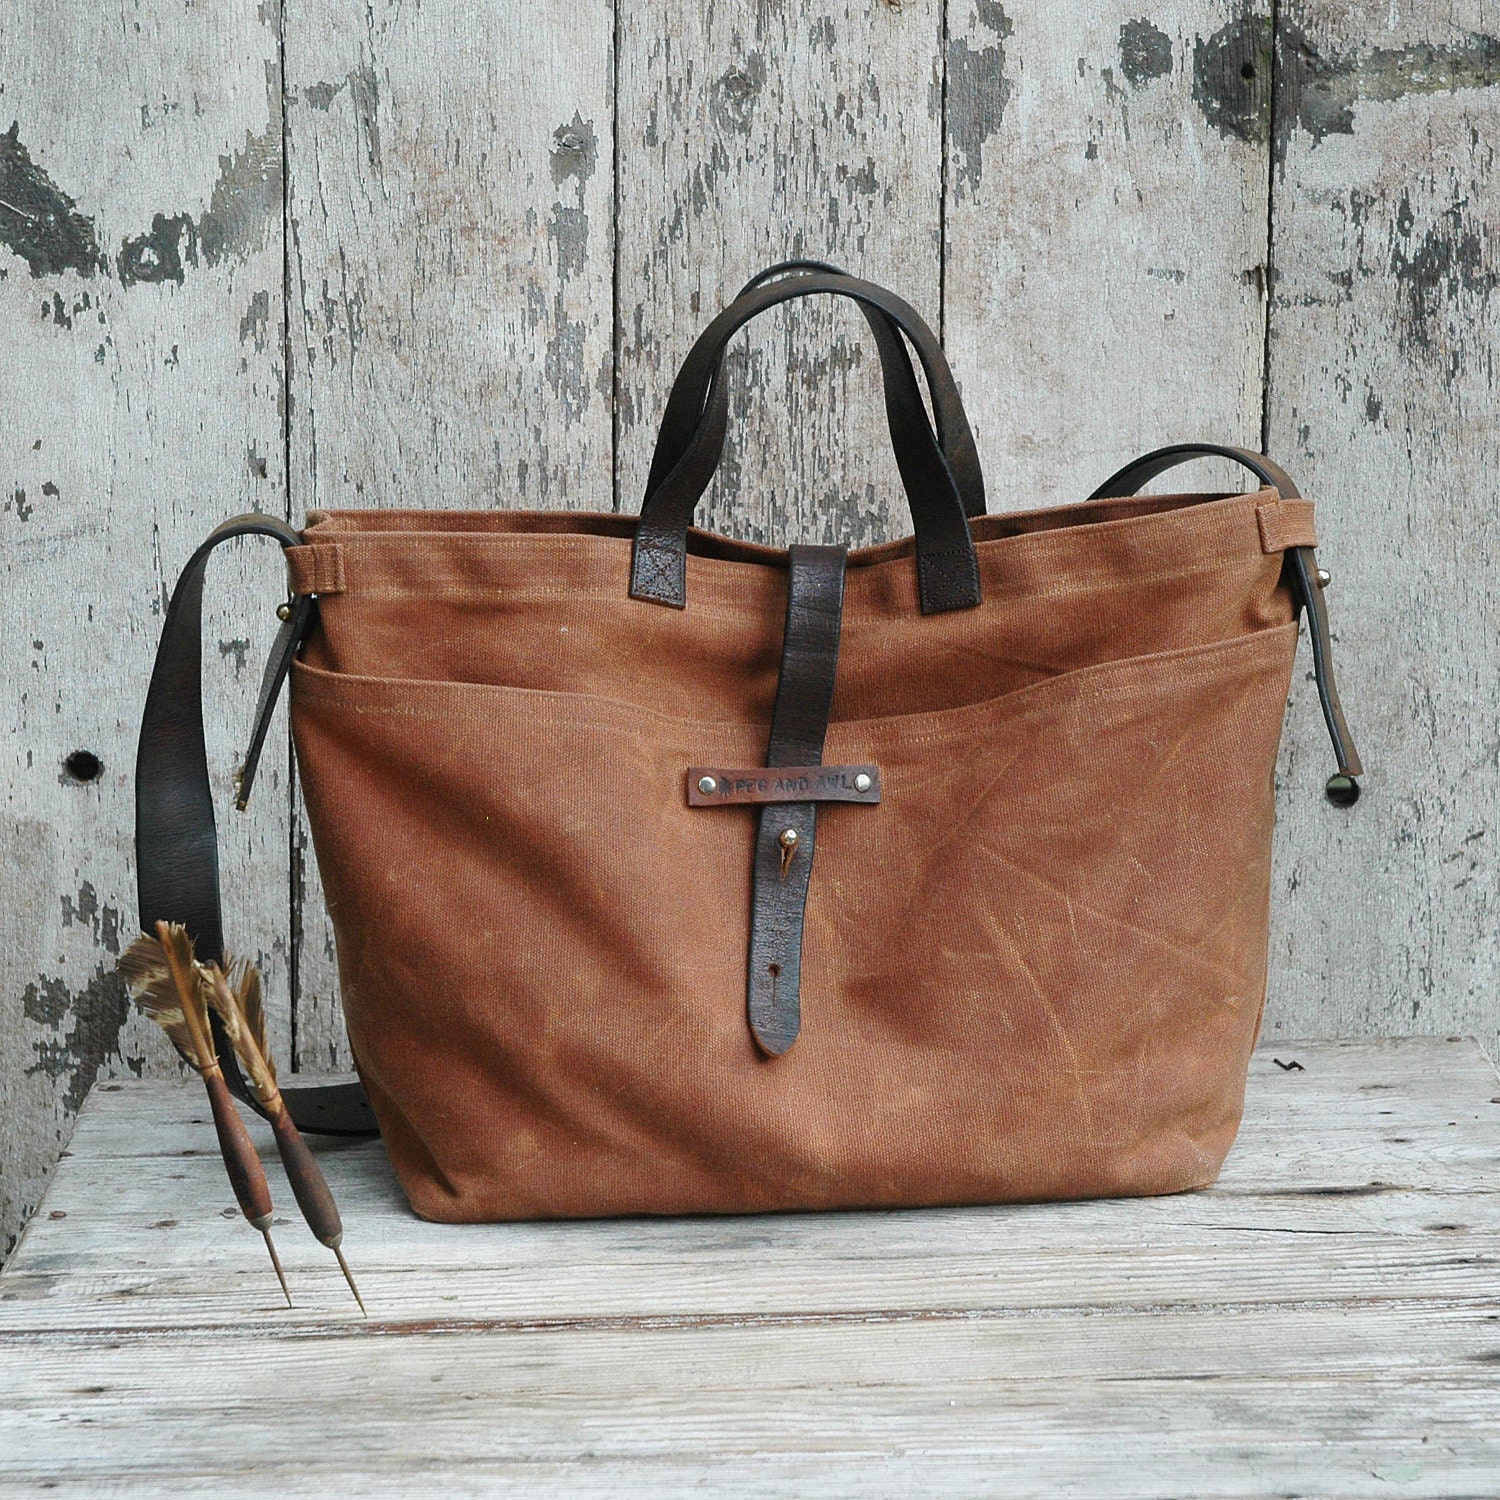 Tote Bag for Women Tote Bag Spice Waxed Canvas Crossbody